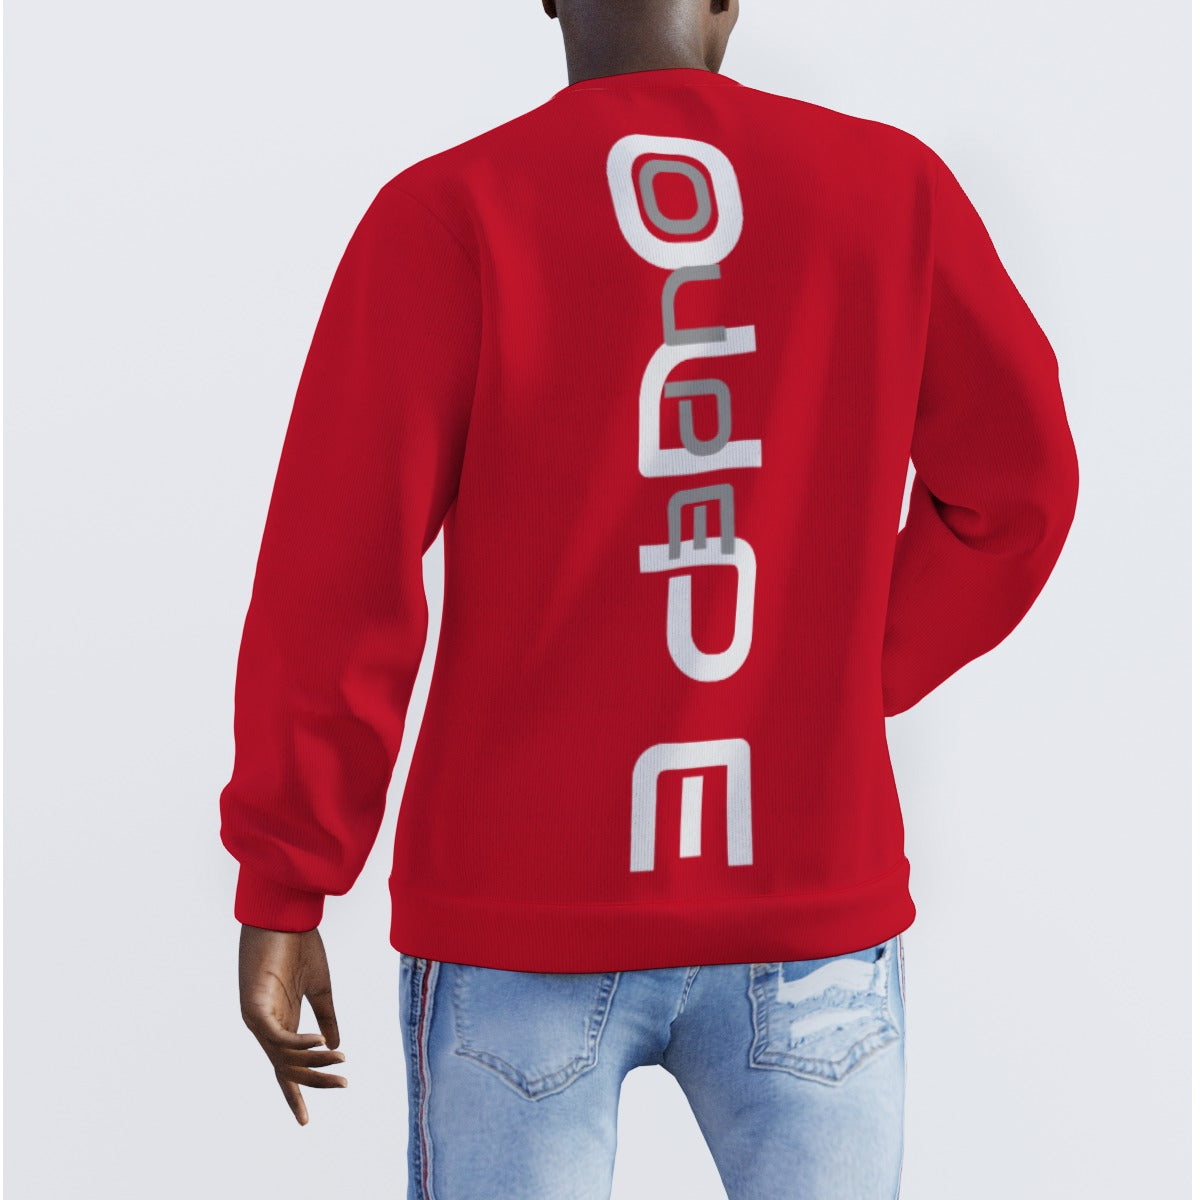 OUP OUPE RED Men's Sweater